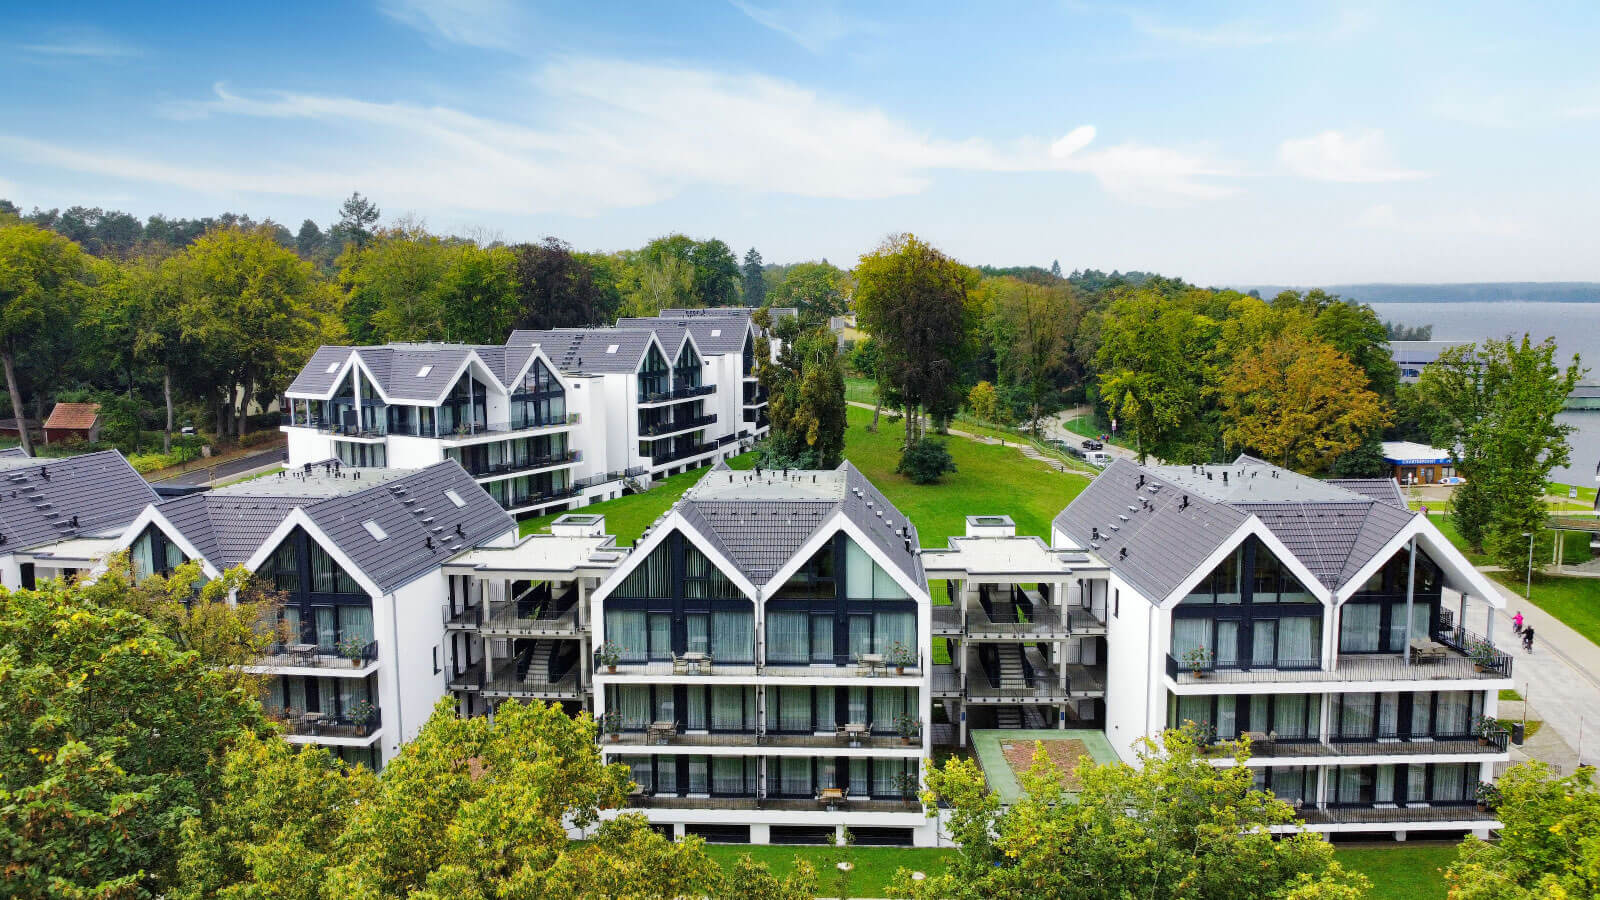 A group of buildings surrounded by trees and grass, representing outdoor real estate investment mana